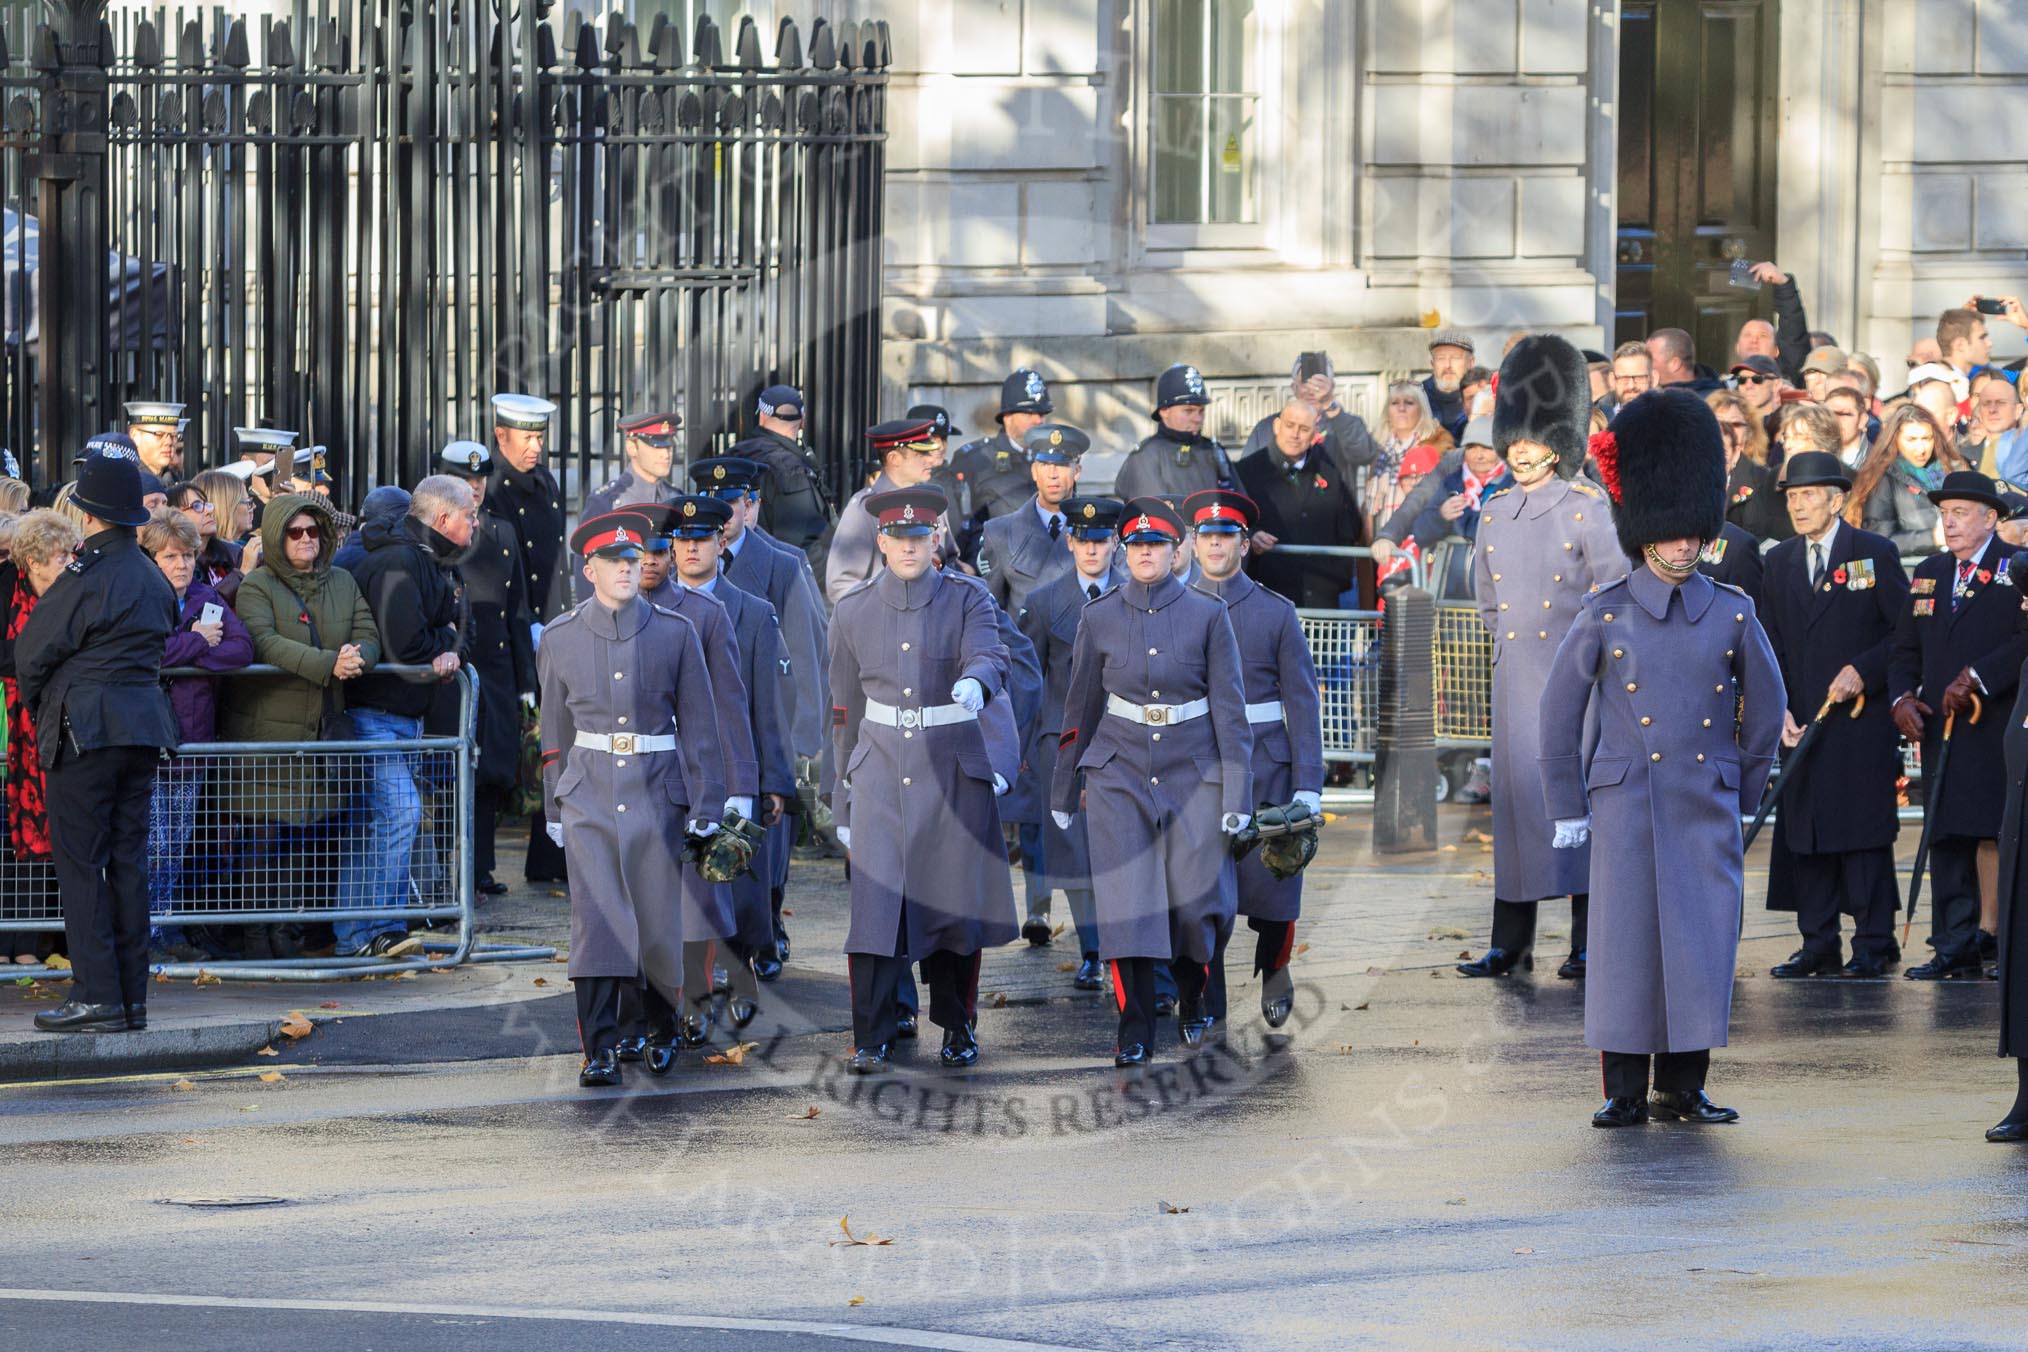 The group of stretcher bearers is leaving Downing Street to take their positions on Whitehall before the Remembrance Sunday Cenotaph Ceremony 2018 at Horse Guards Parade, Westminster, London, 11 November 2018, 10:08.